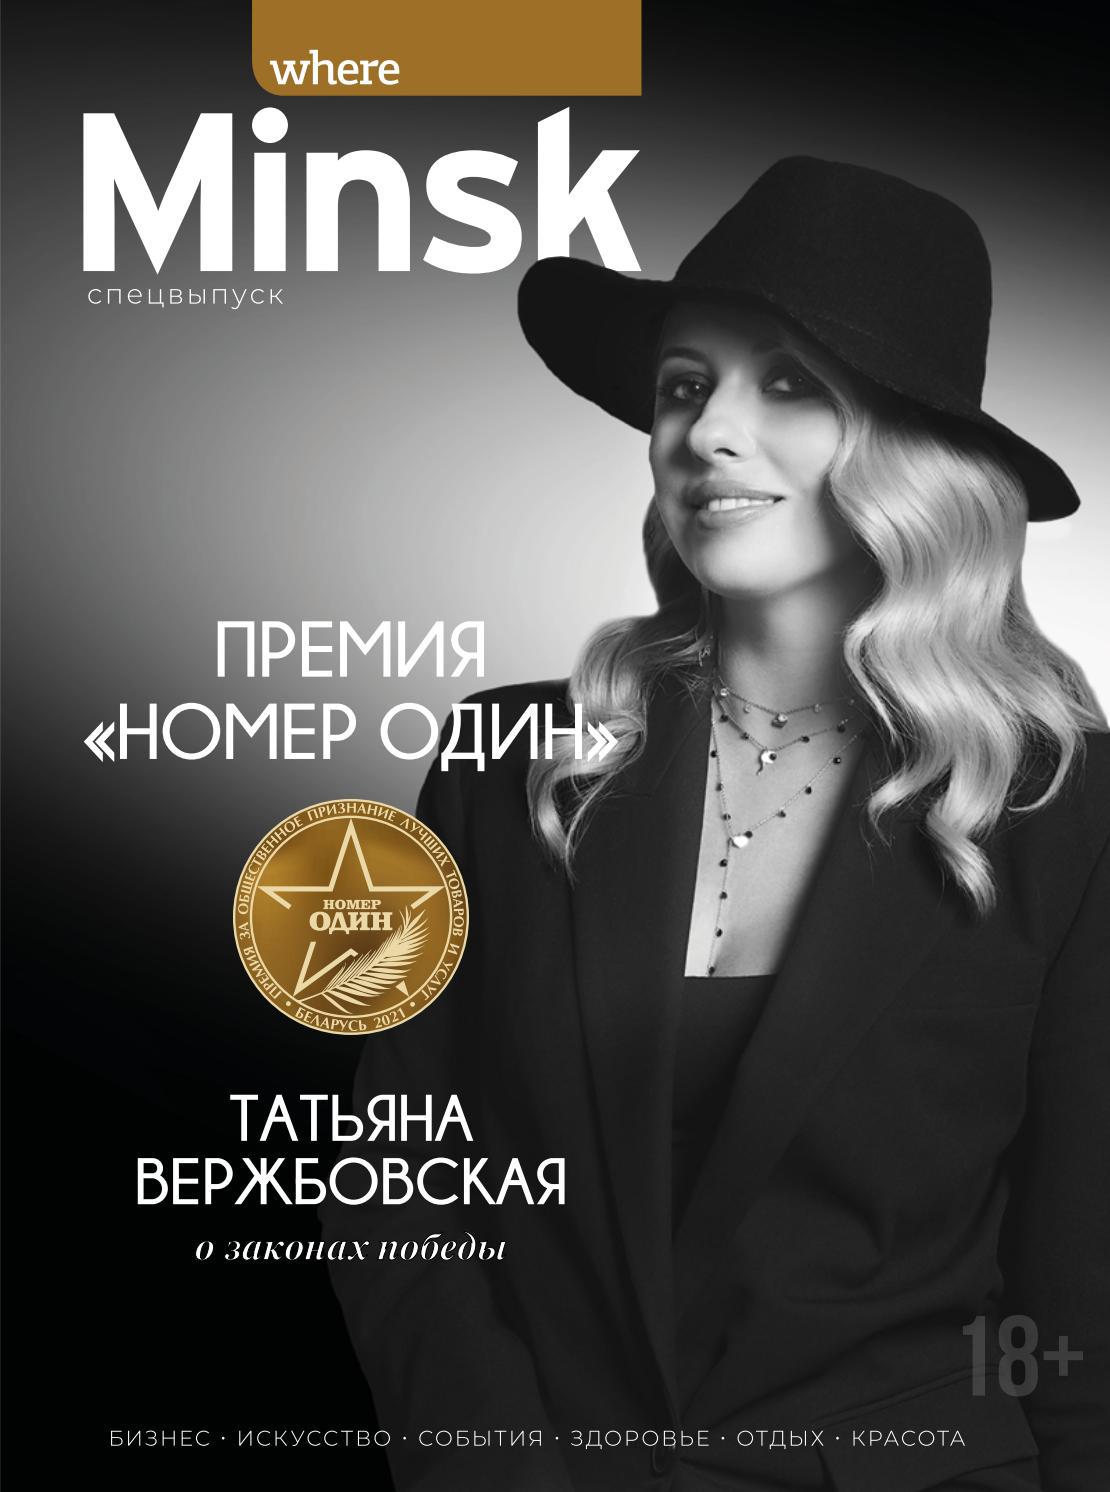 where Minsk - special issue